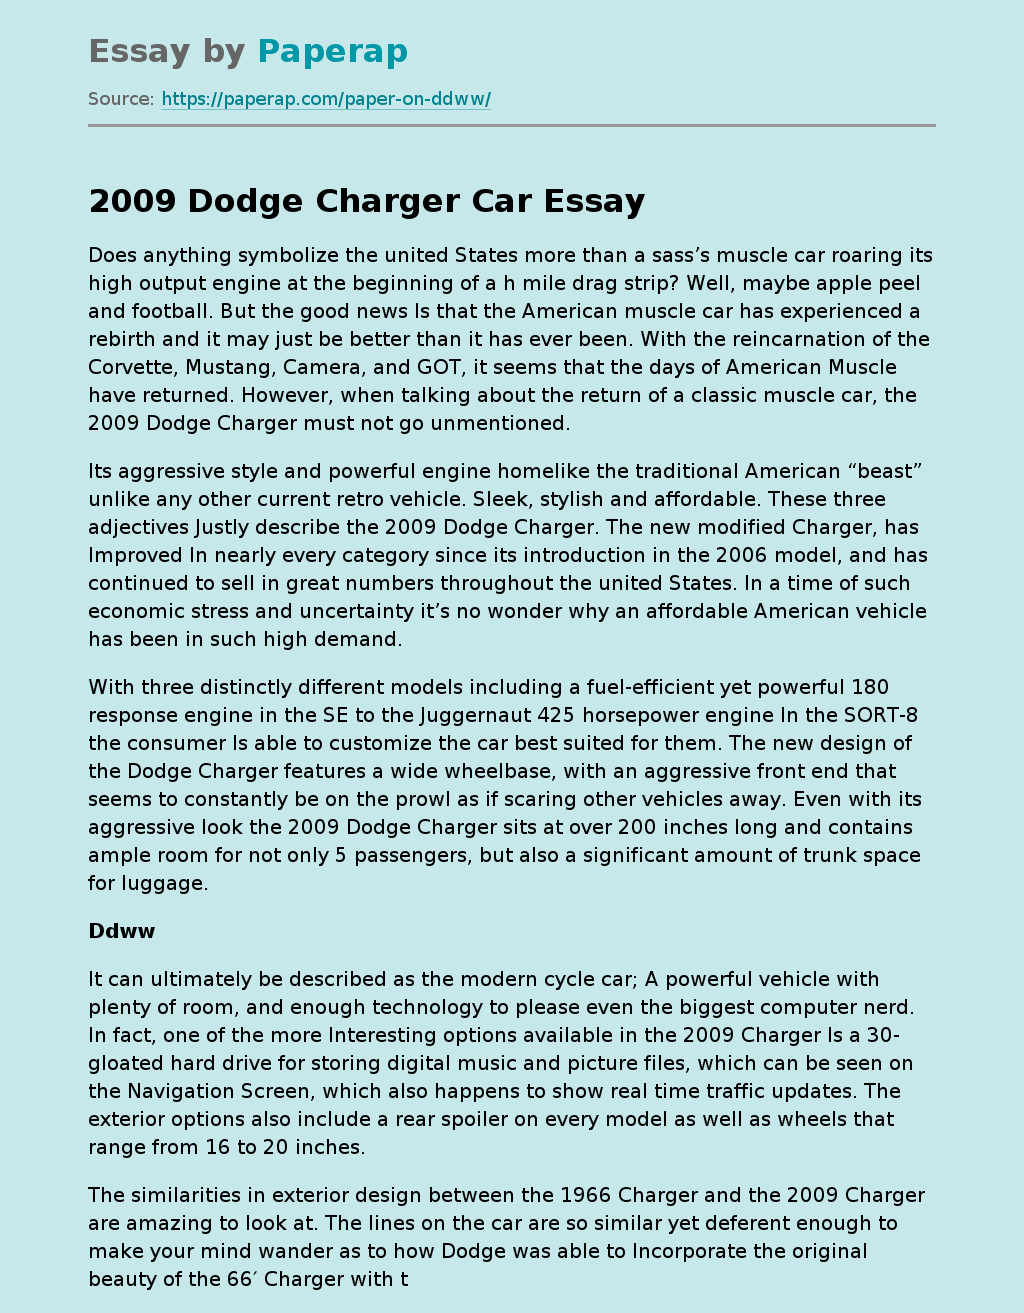 2009 Dodge Charger Car